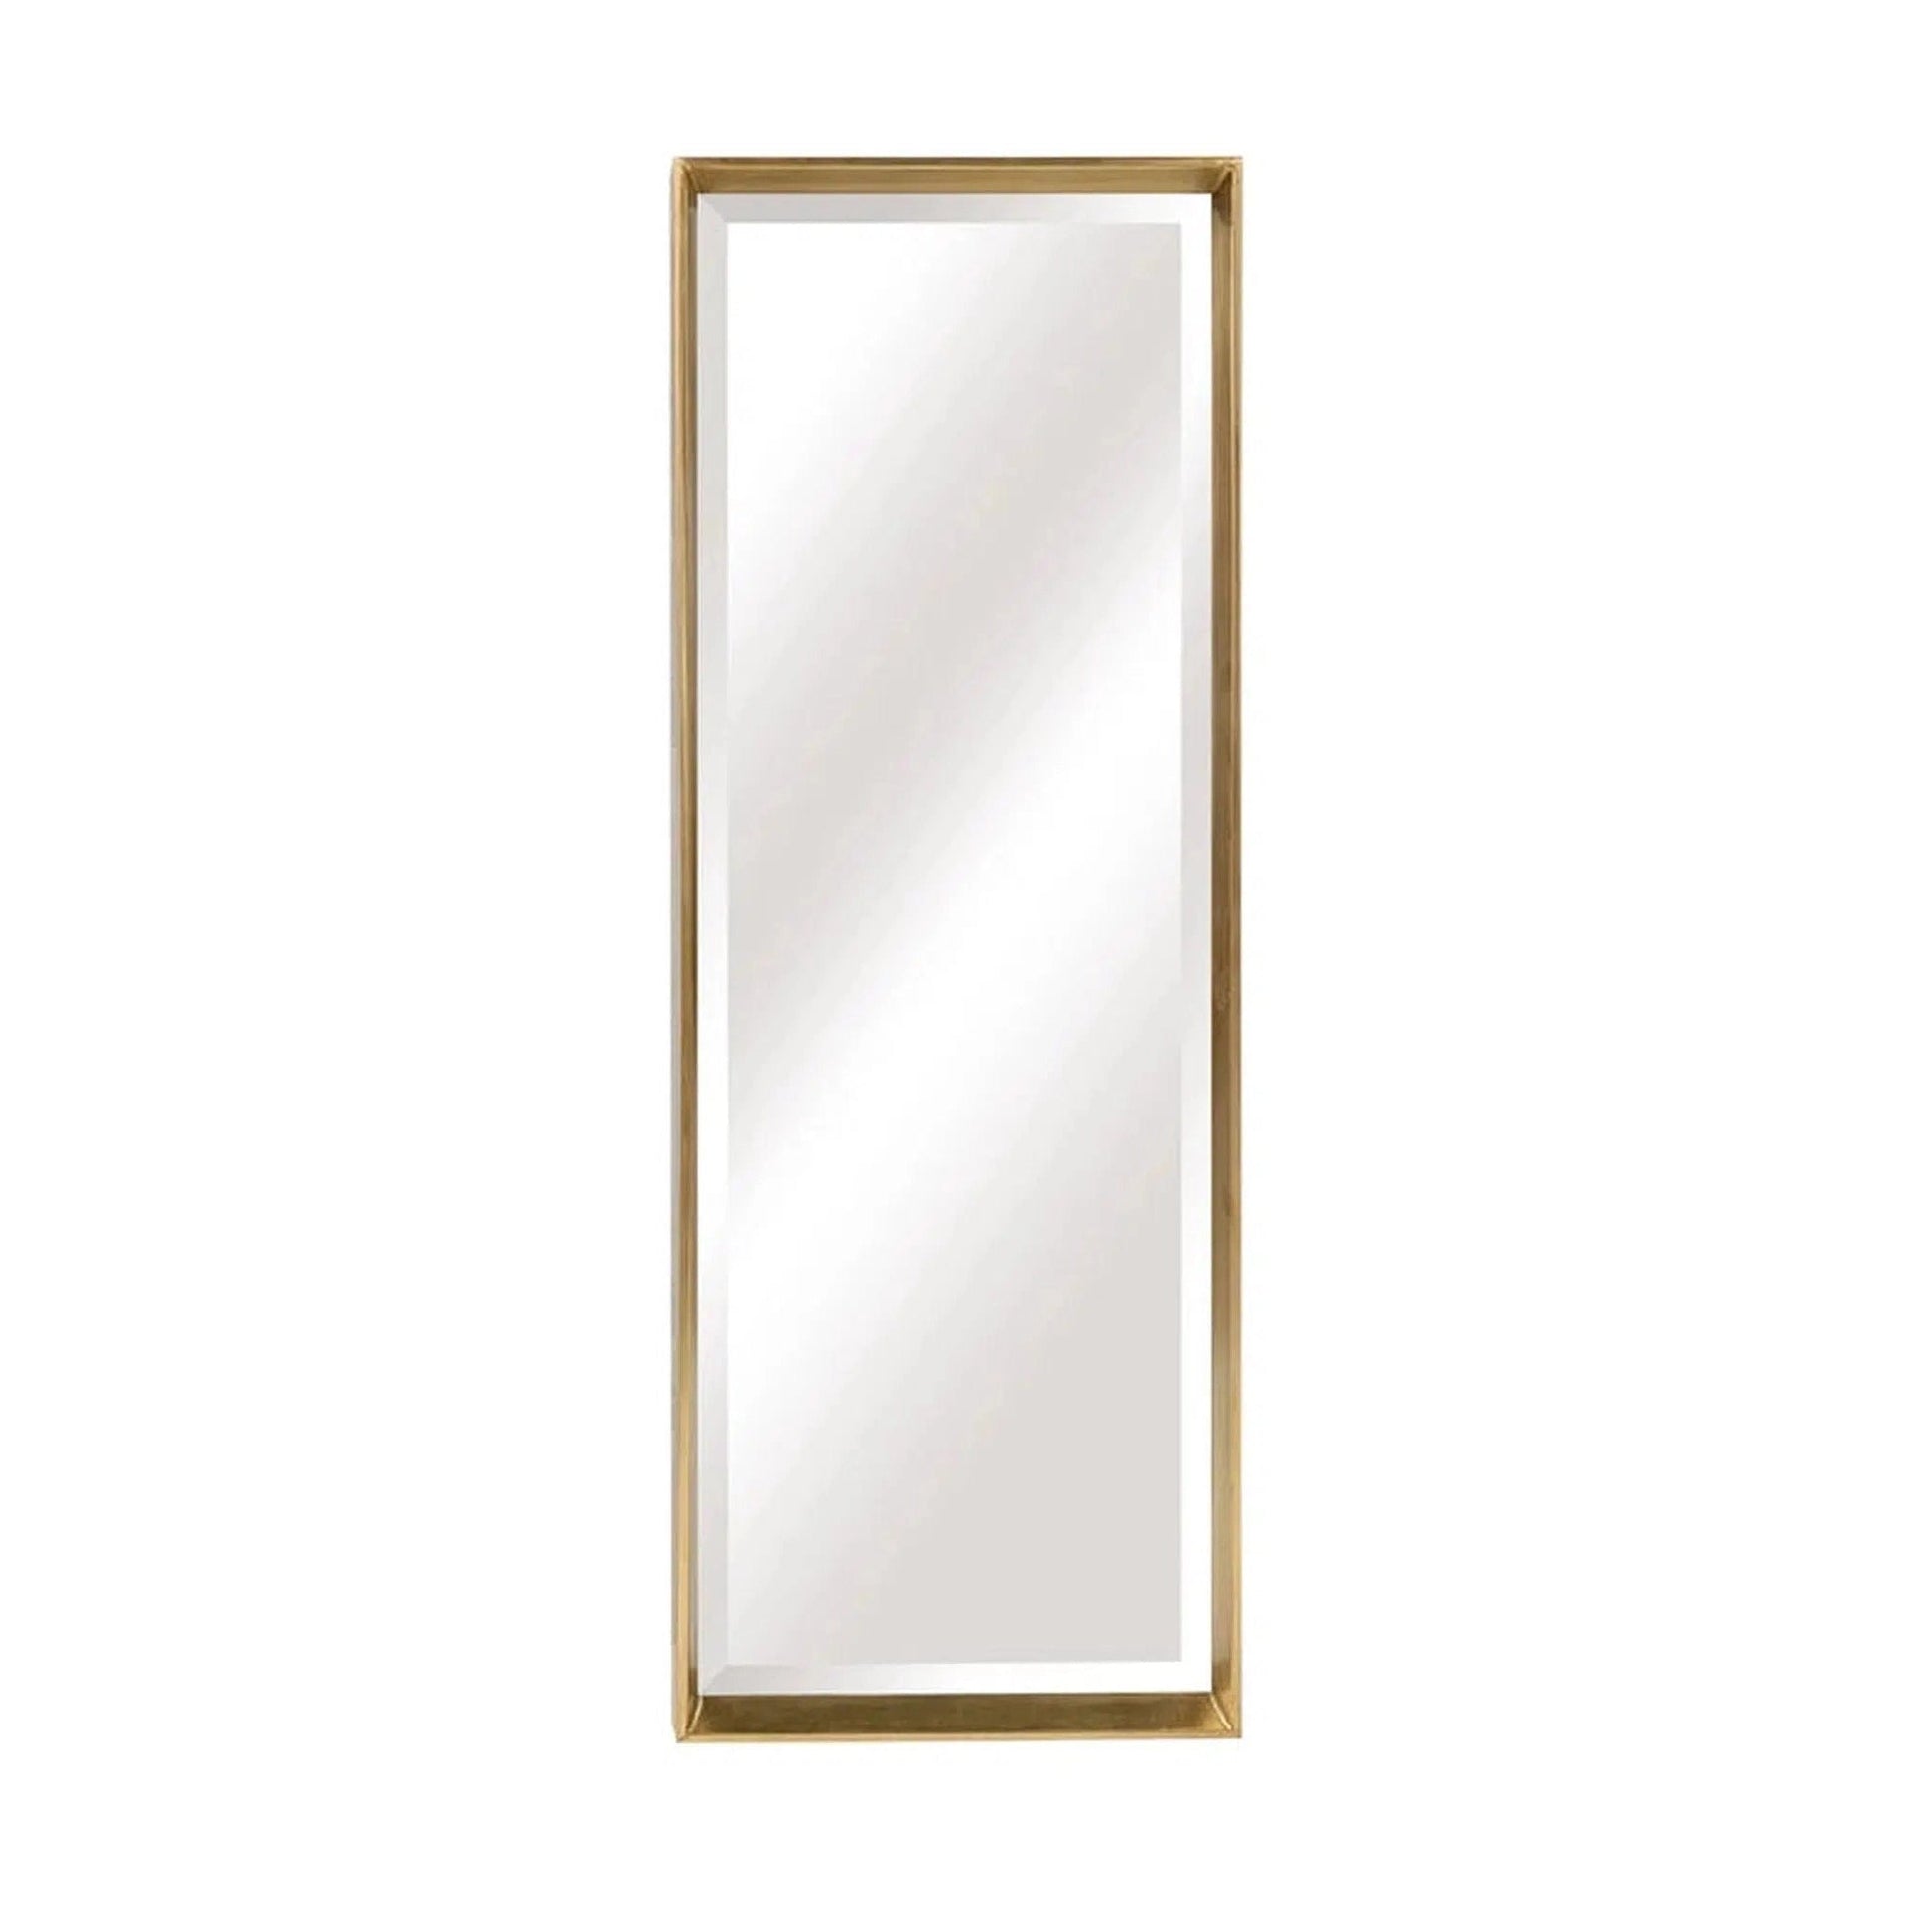 SBC Decor Mia Modern 12" x 47" Wall-Mounted Tray Frame Long Wall Mirror In Brushed Gold Finish